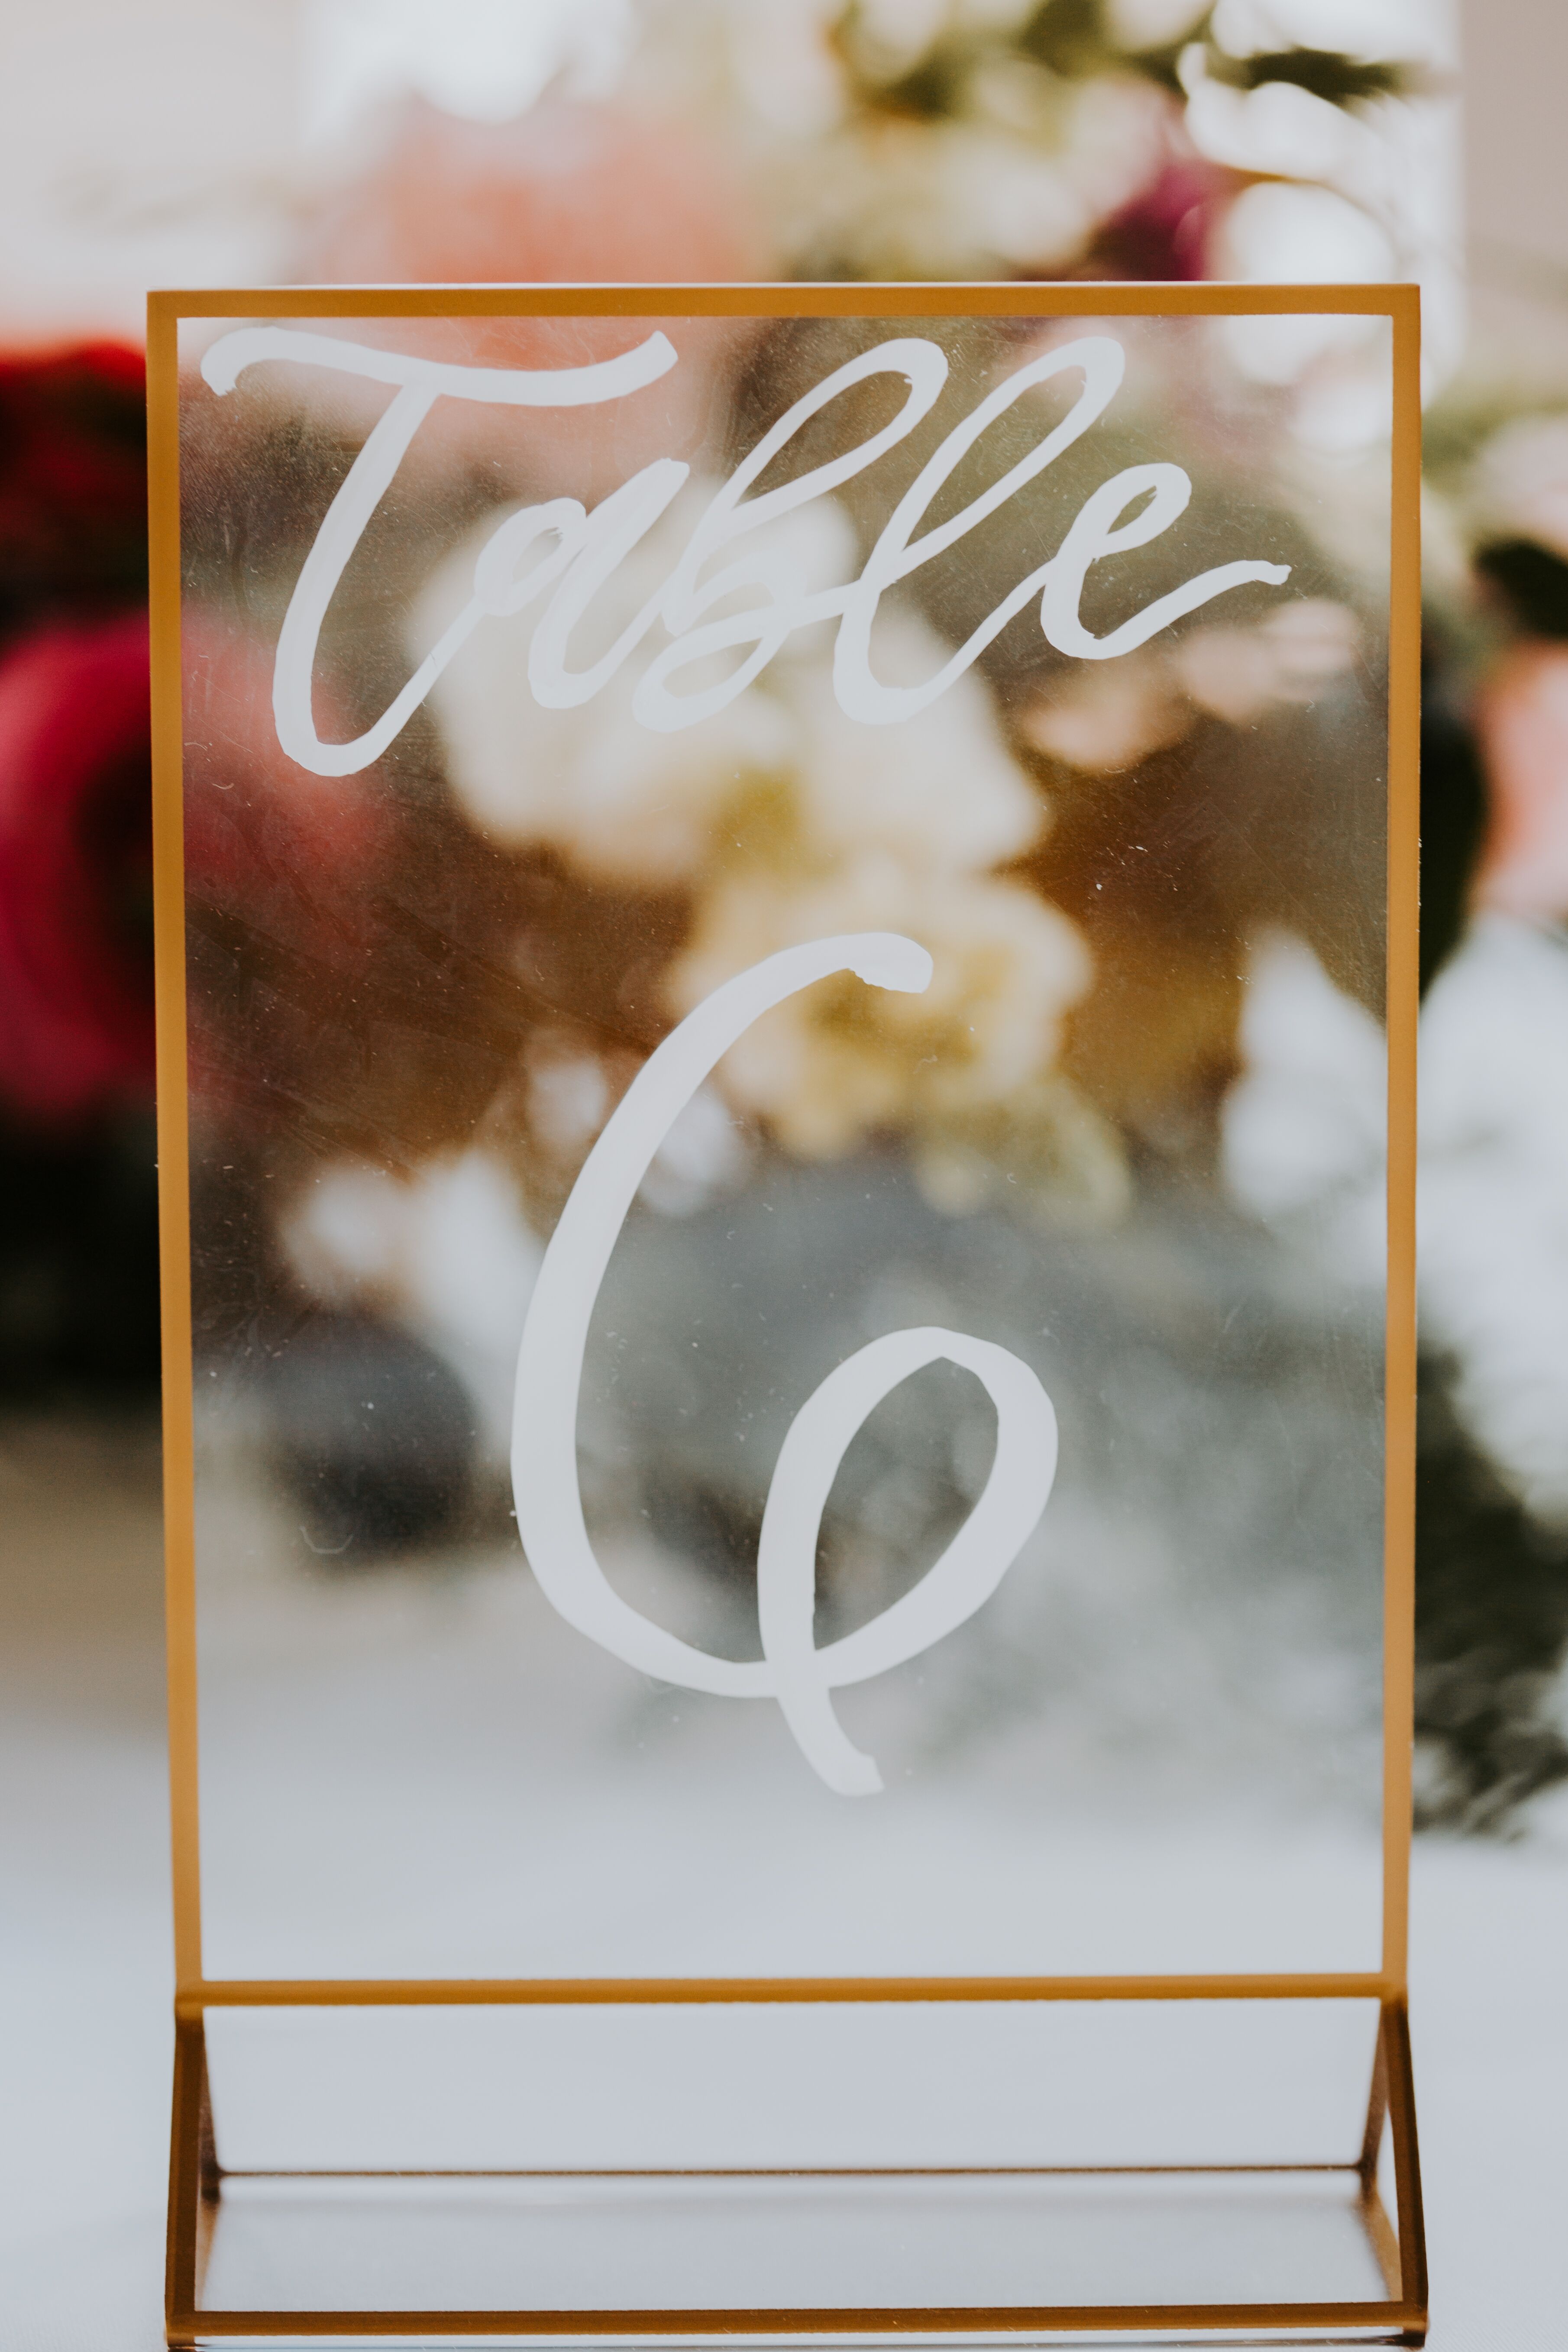 Wedding table number in a gold frame using a gold sharpie on